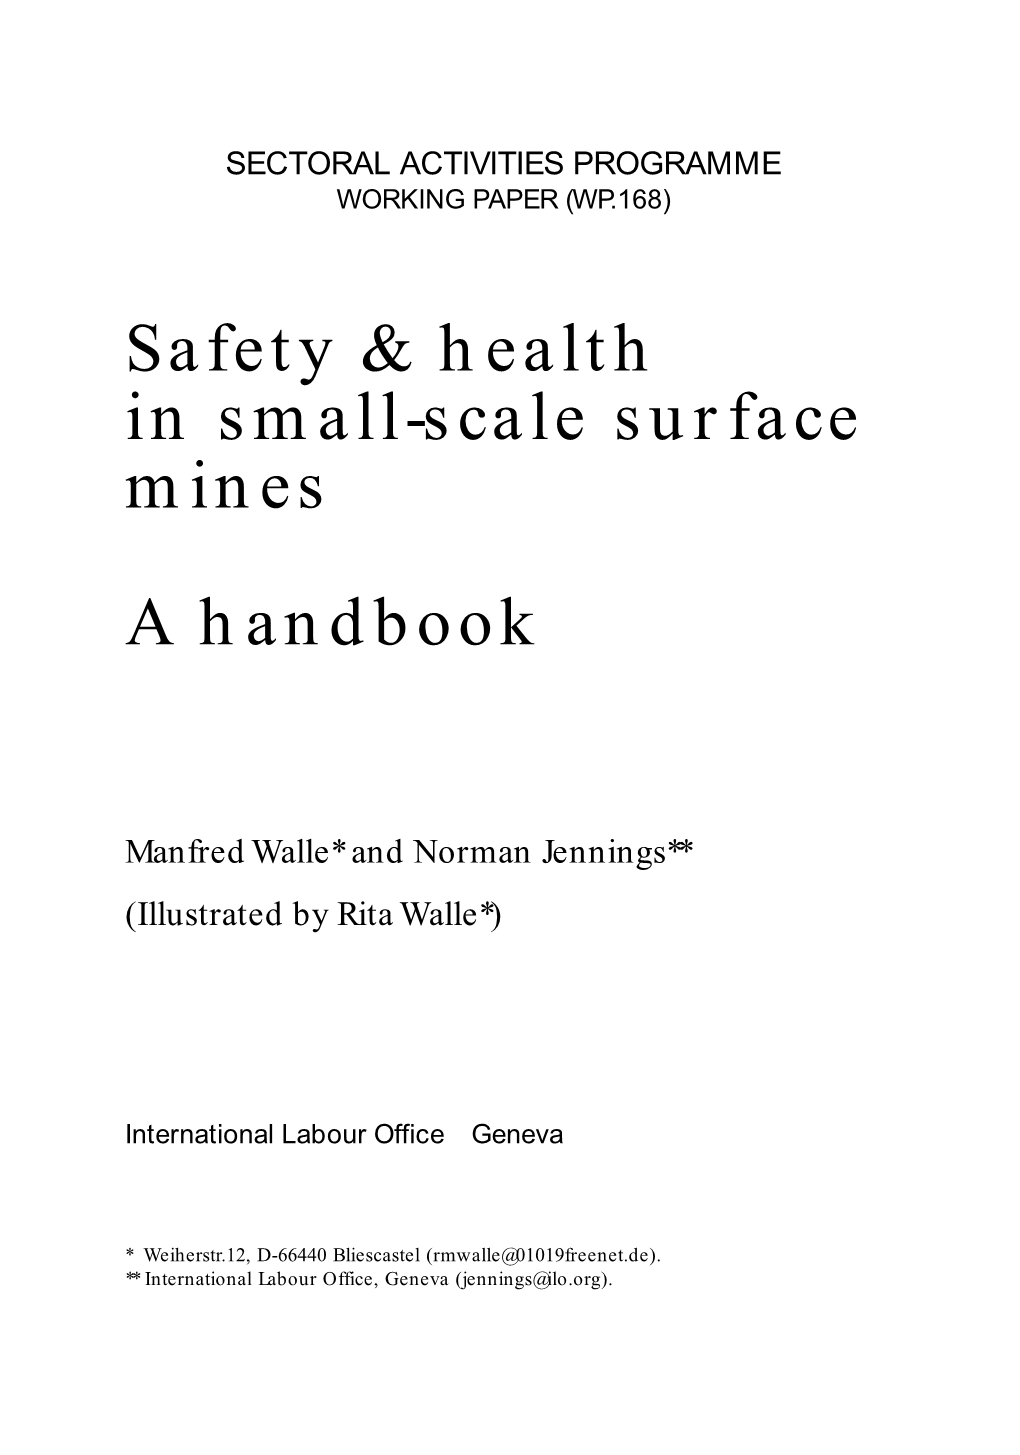 Safety and Health in Small-Scale Surface Mines: a Handbook